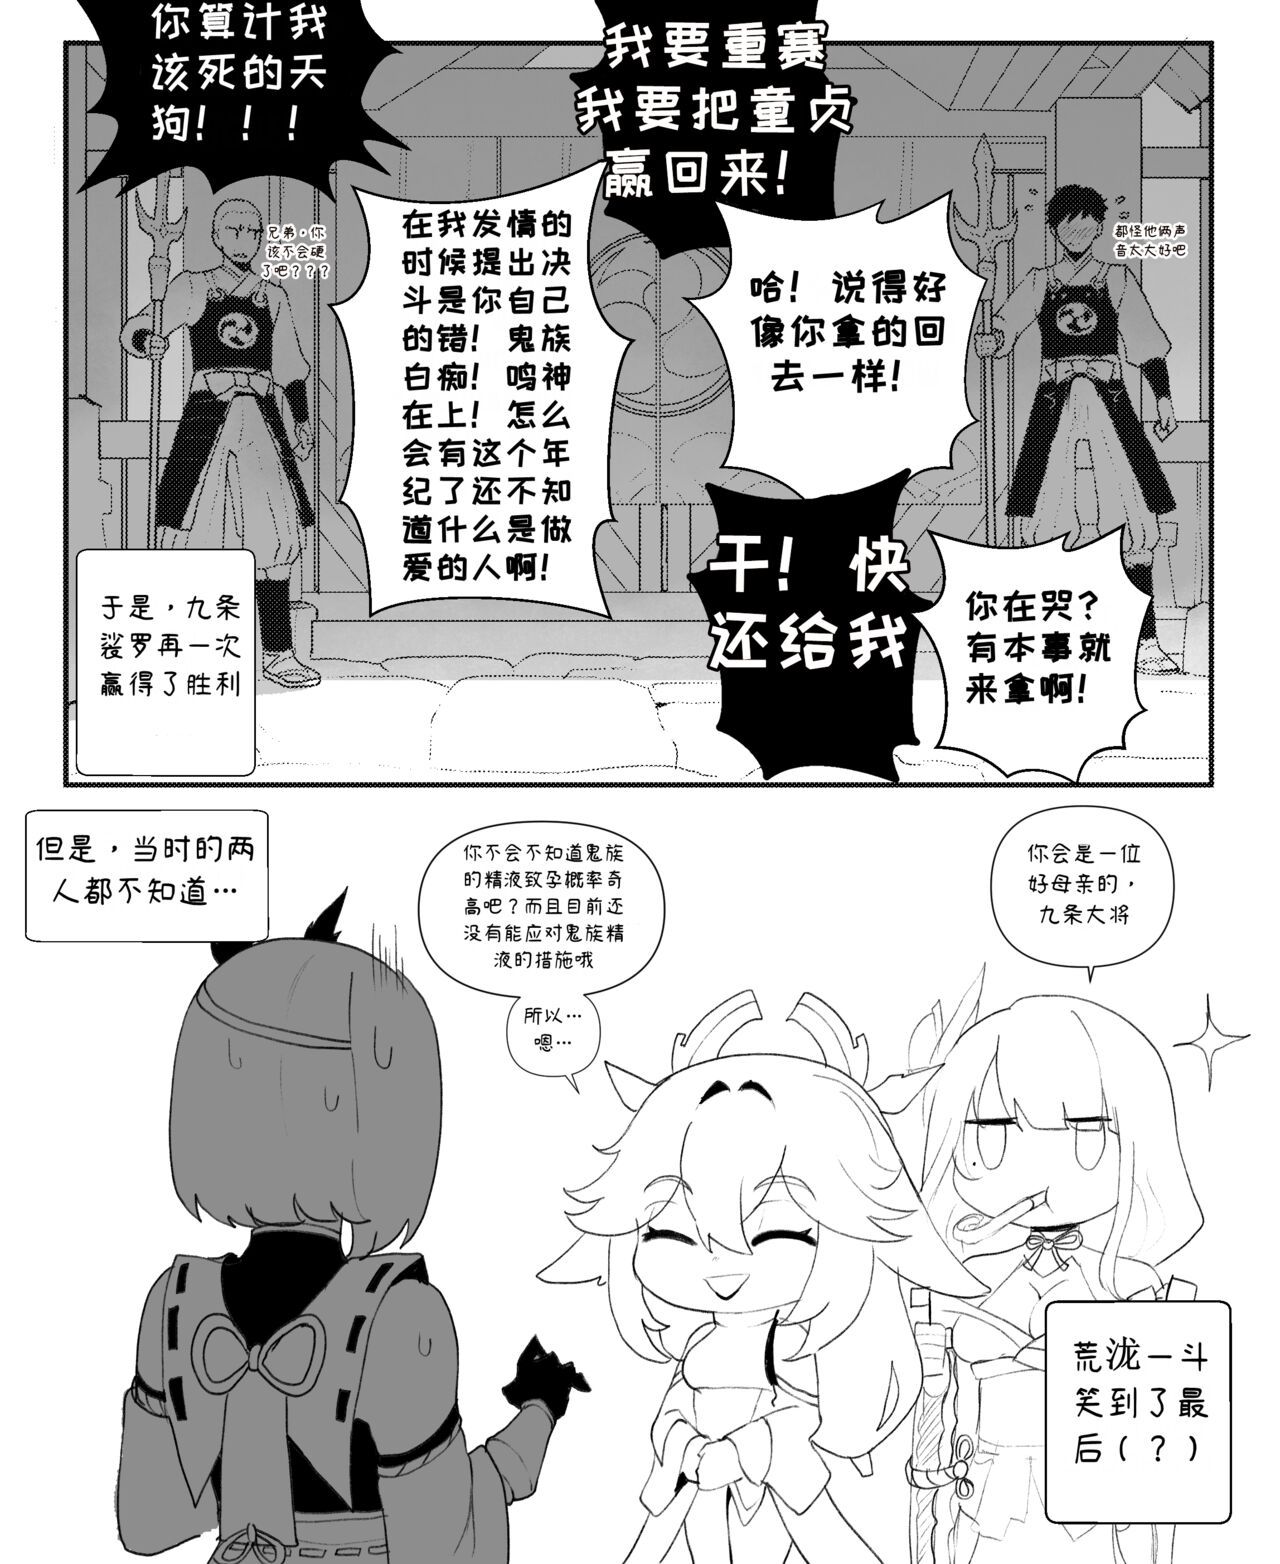 ThiccWithaQ [Chinese] [Ongoing] ThiccWithaQ 【Neko汉化】 160